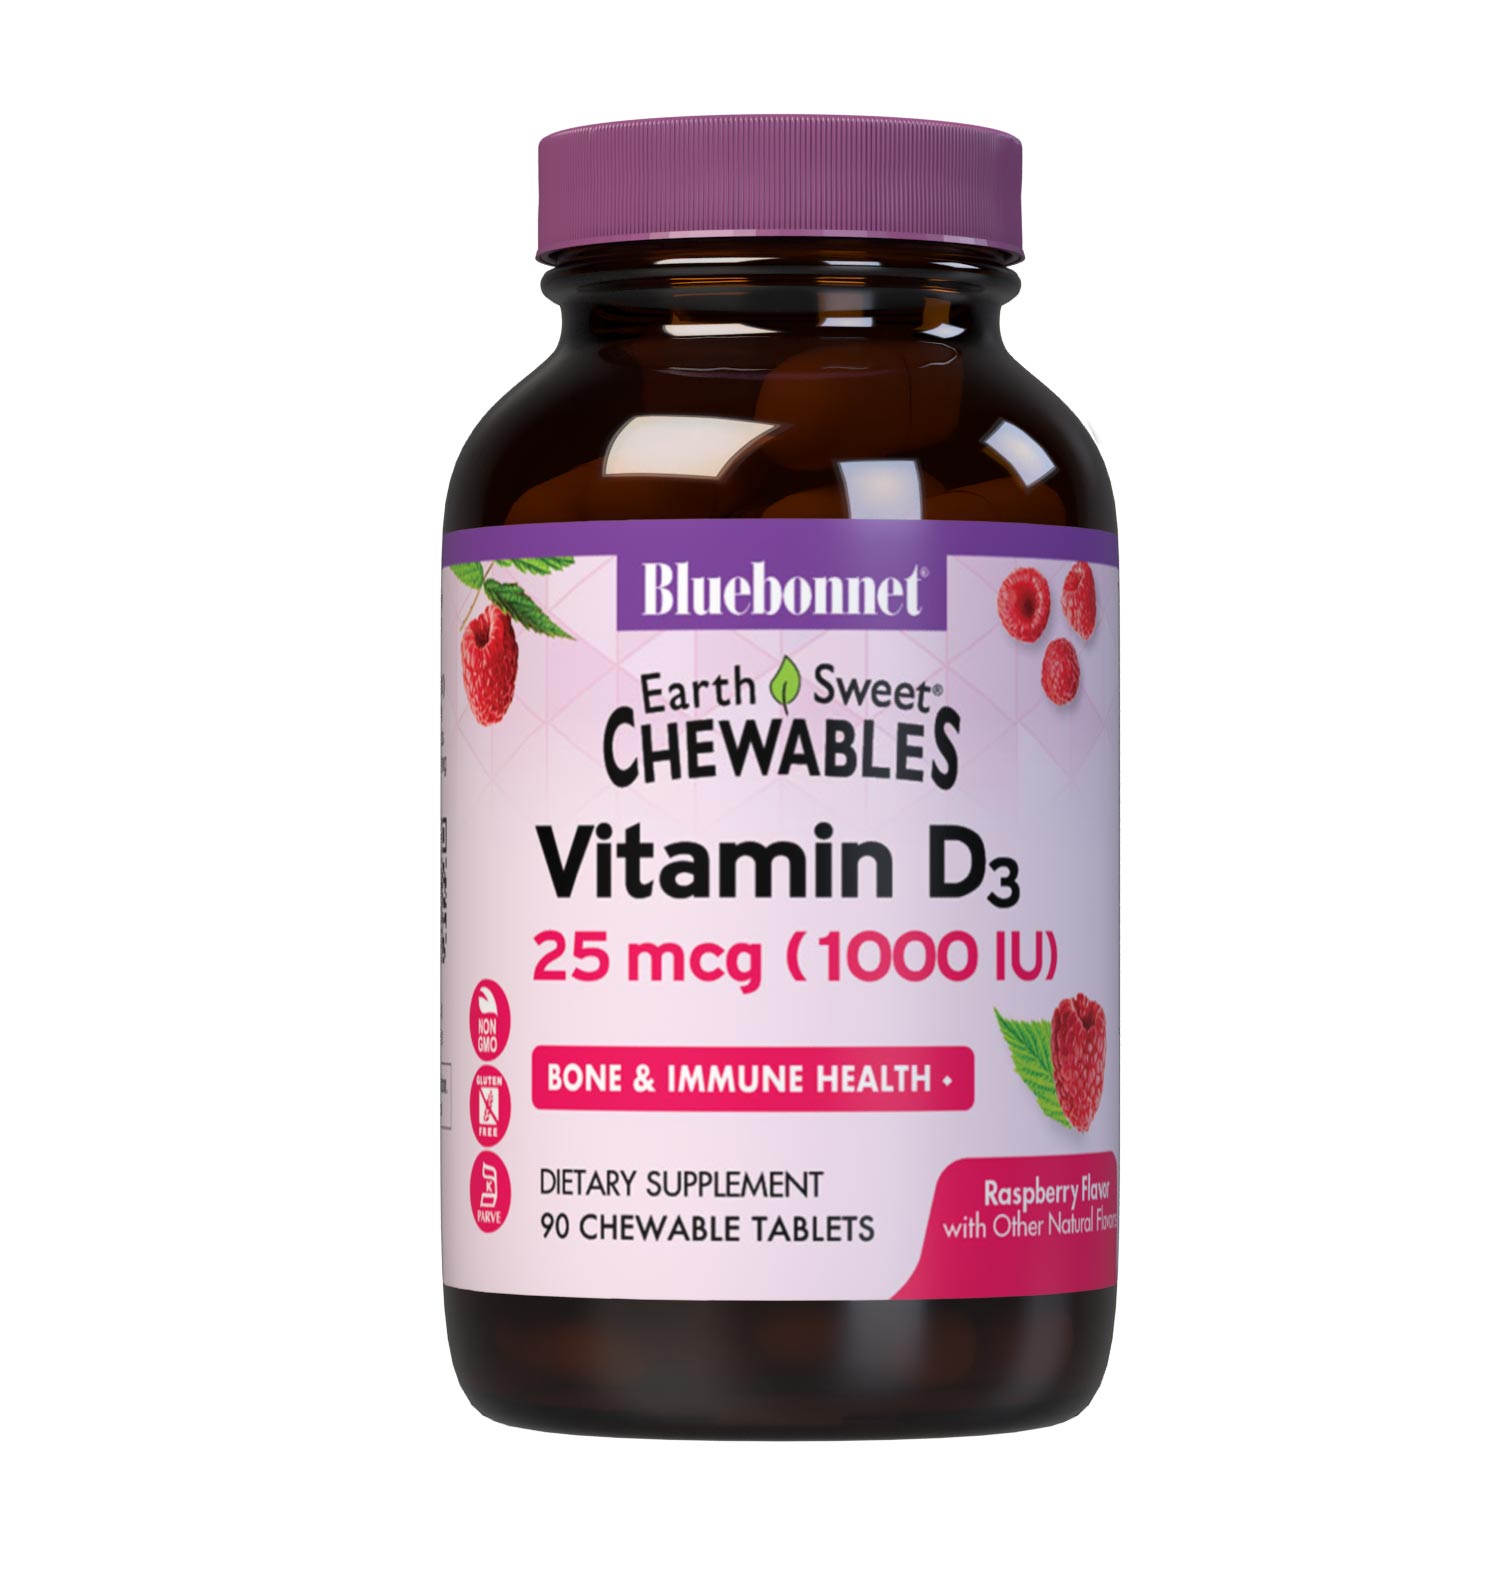 Bluebonnet’s EarthSweet Chewables Vitamin D3 1000 IU (25 mcg) 90 chewable tablets are formulated with vitamin D3 (cholecalciferol) from lanolin that supports strong bones and immune function in a delicious raspberry flavor. #size_90 count